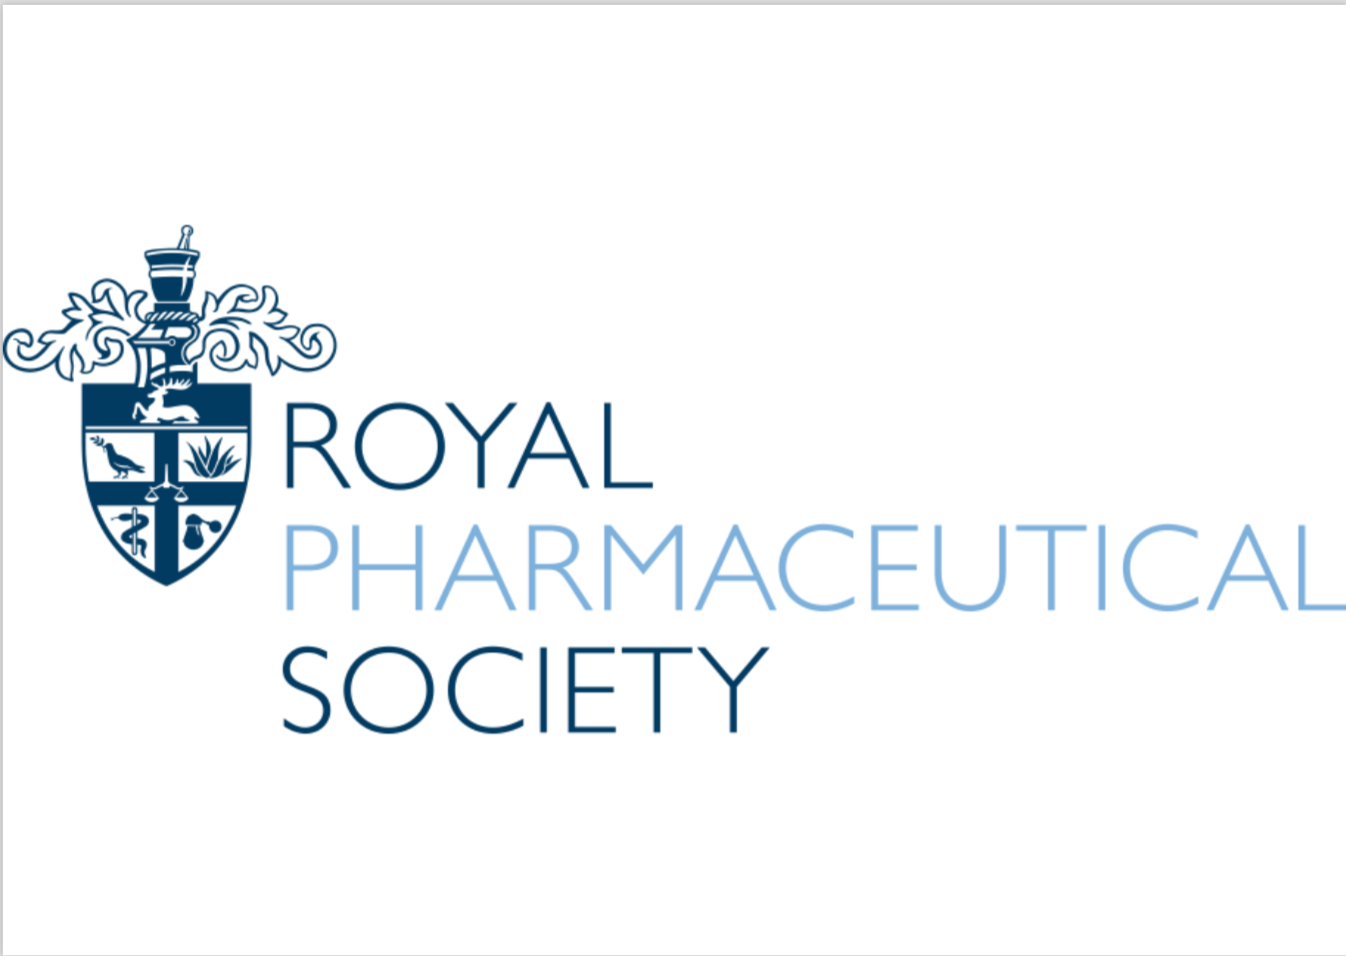 Free Minor Illness Clinical Training from the Royal Pharmaceutical Society